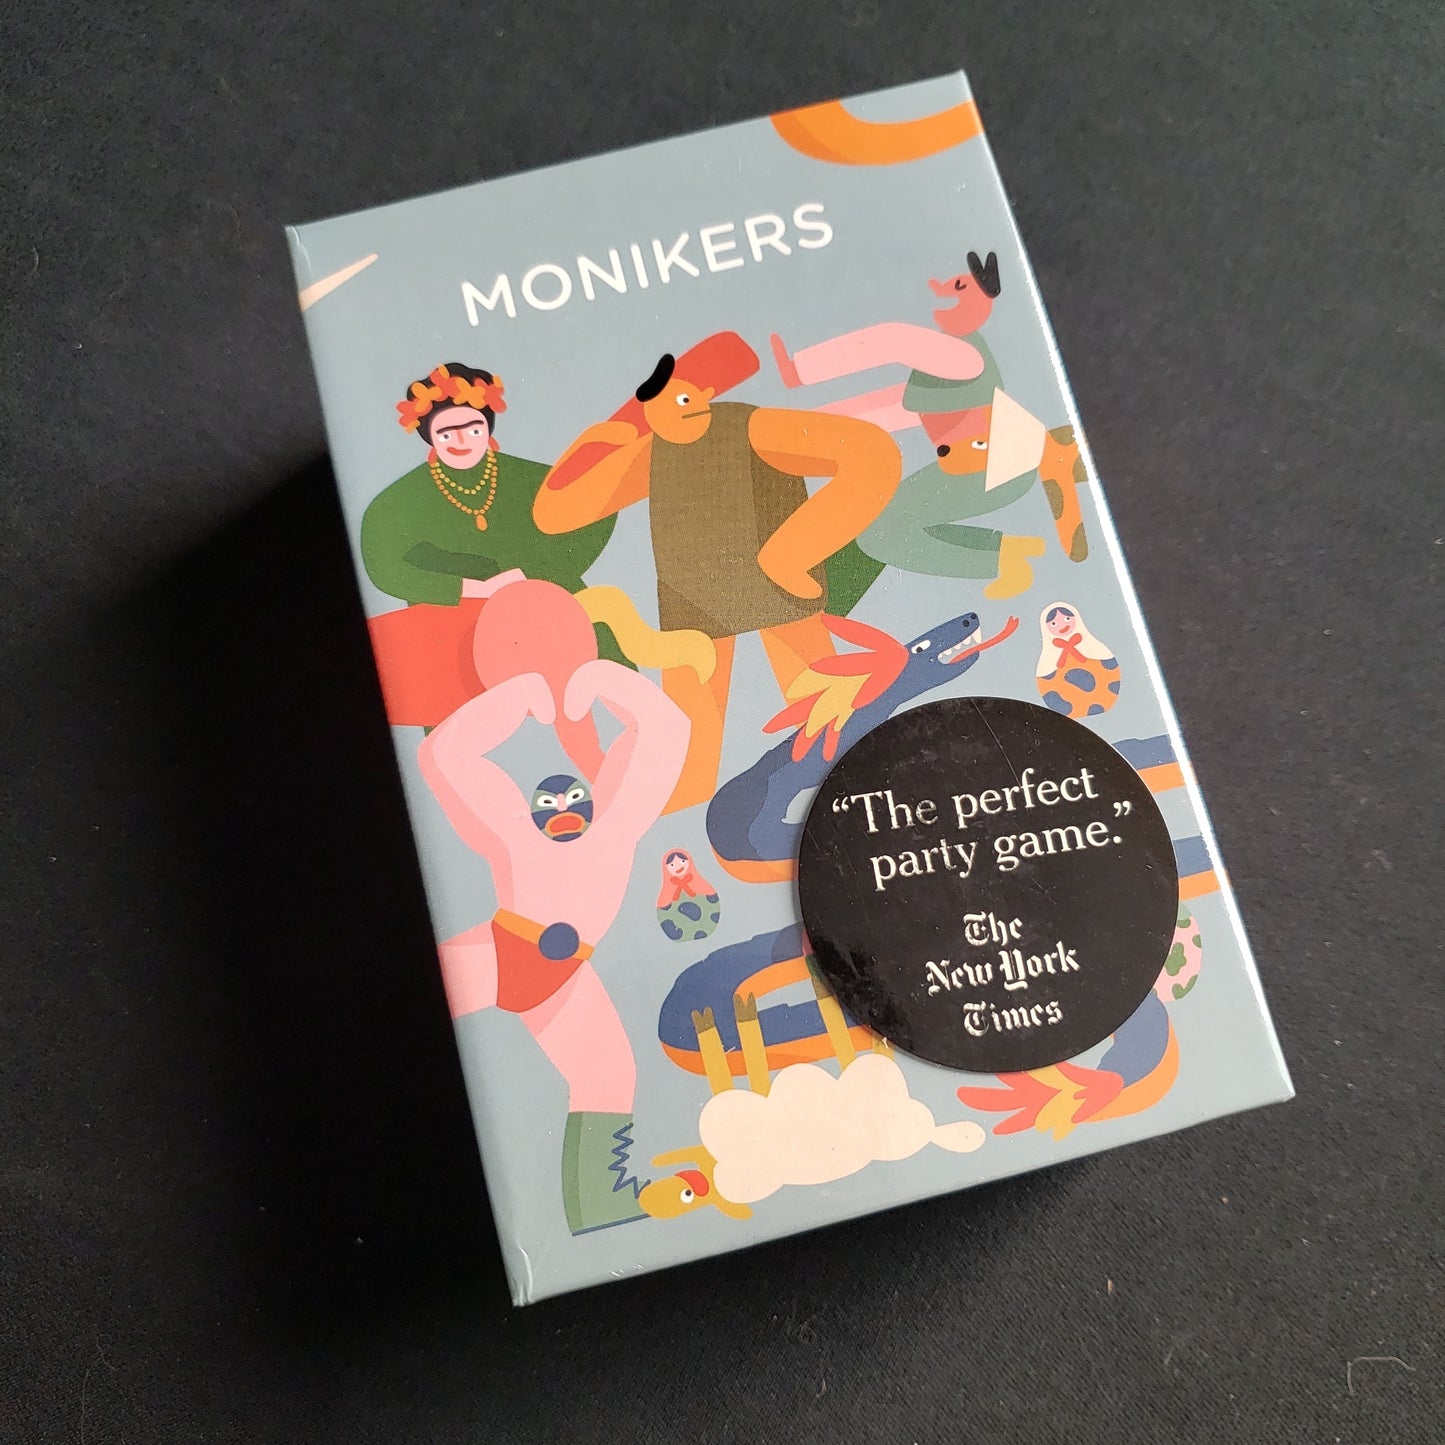 Image shows the front cover of the box of the Monikers party game